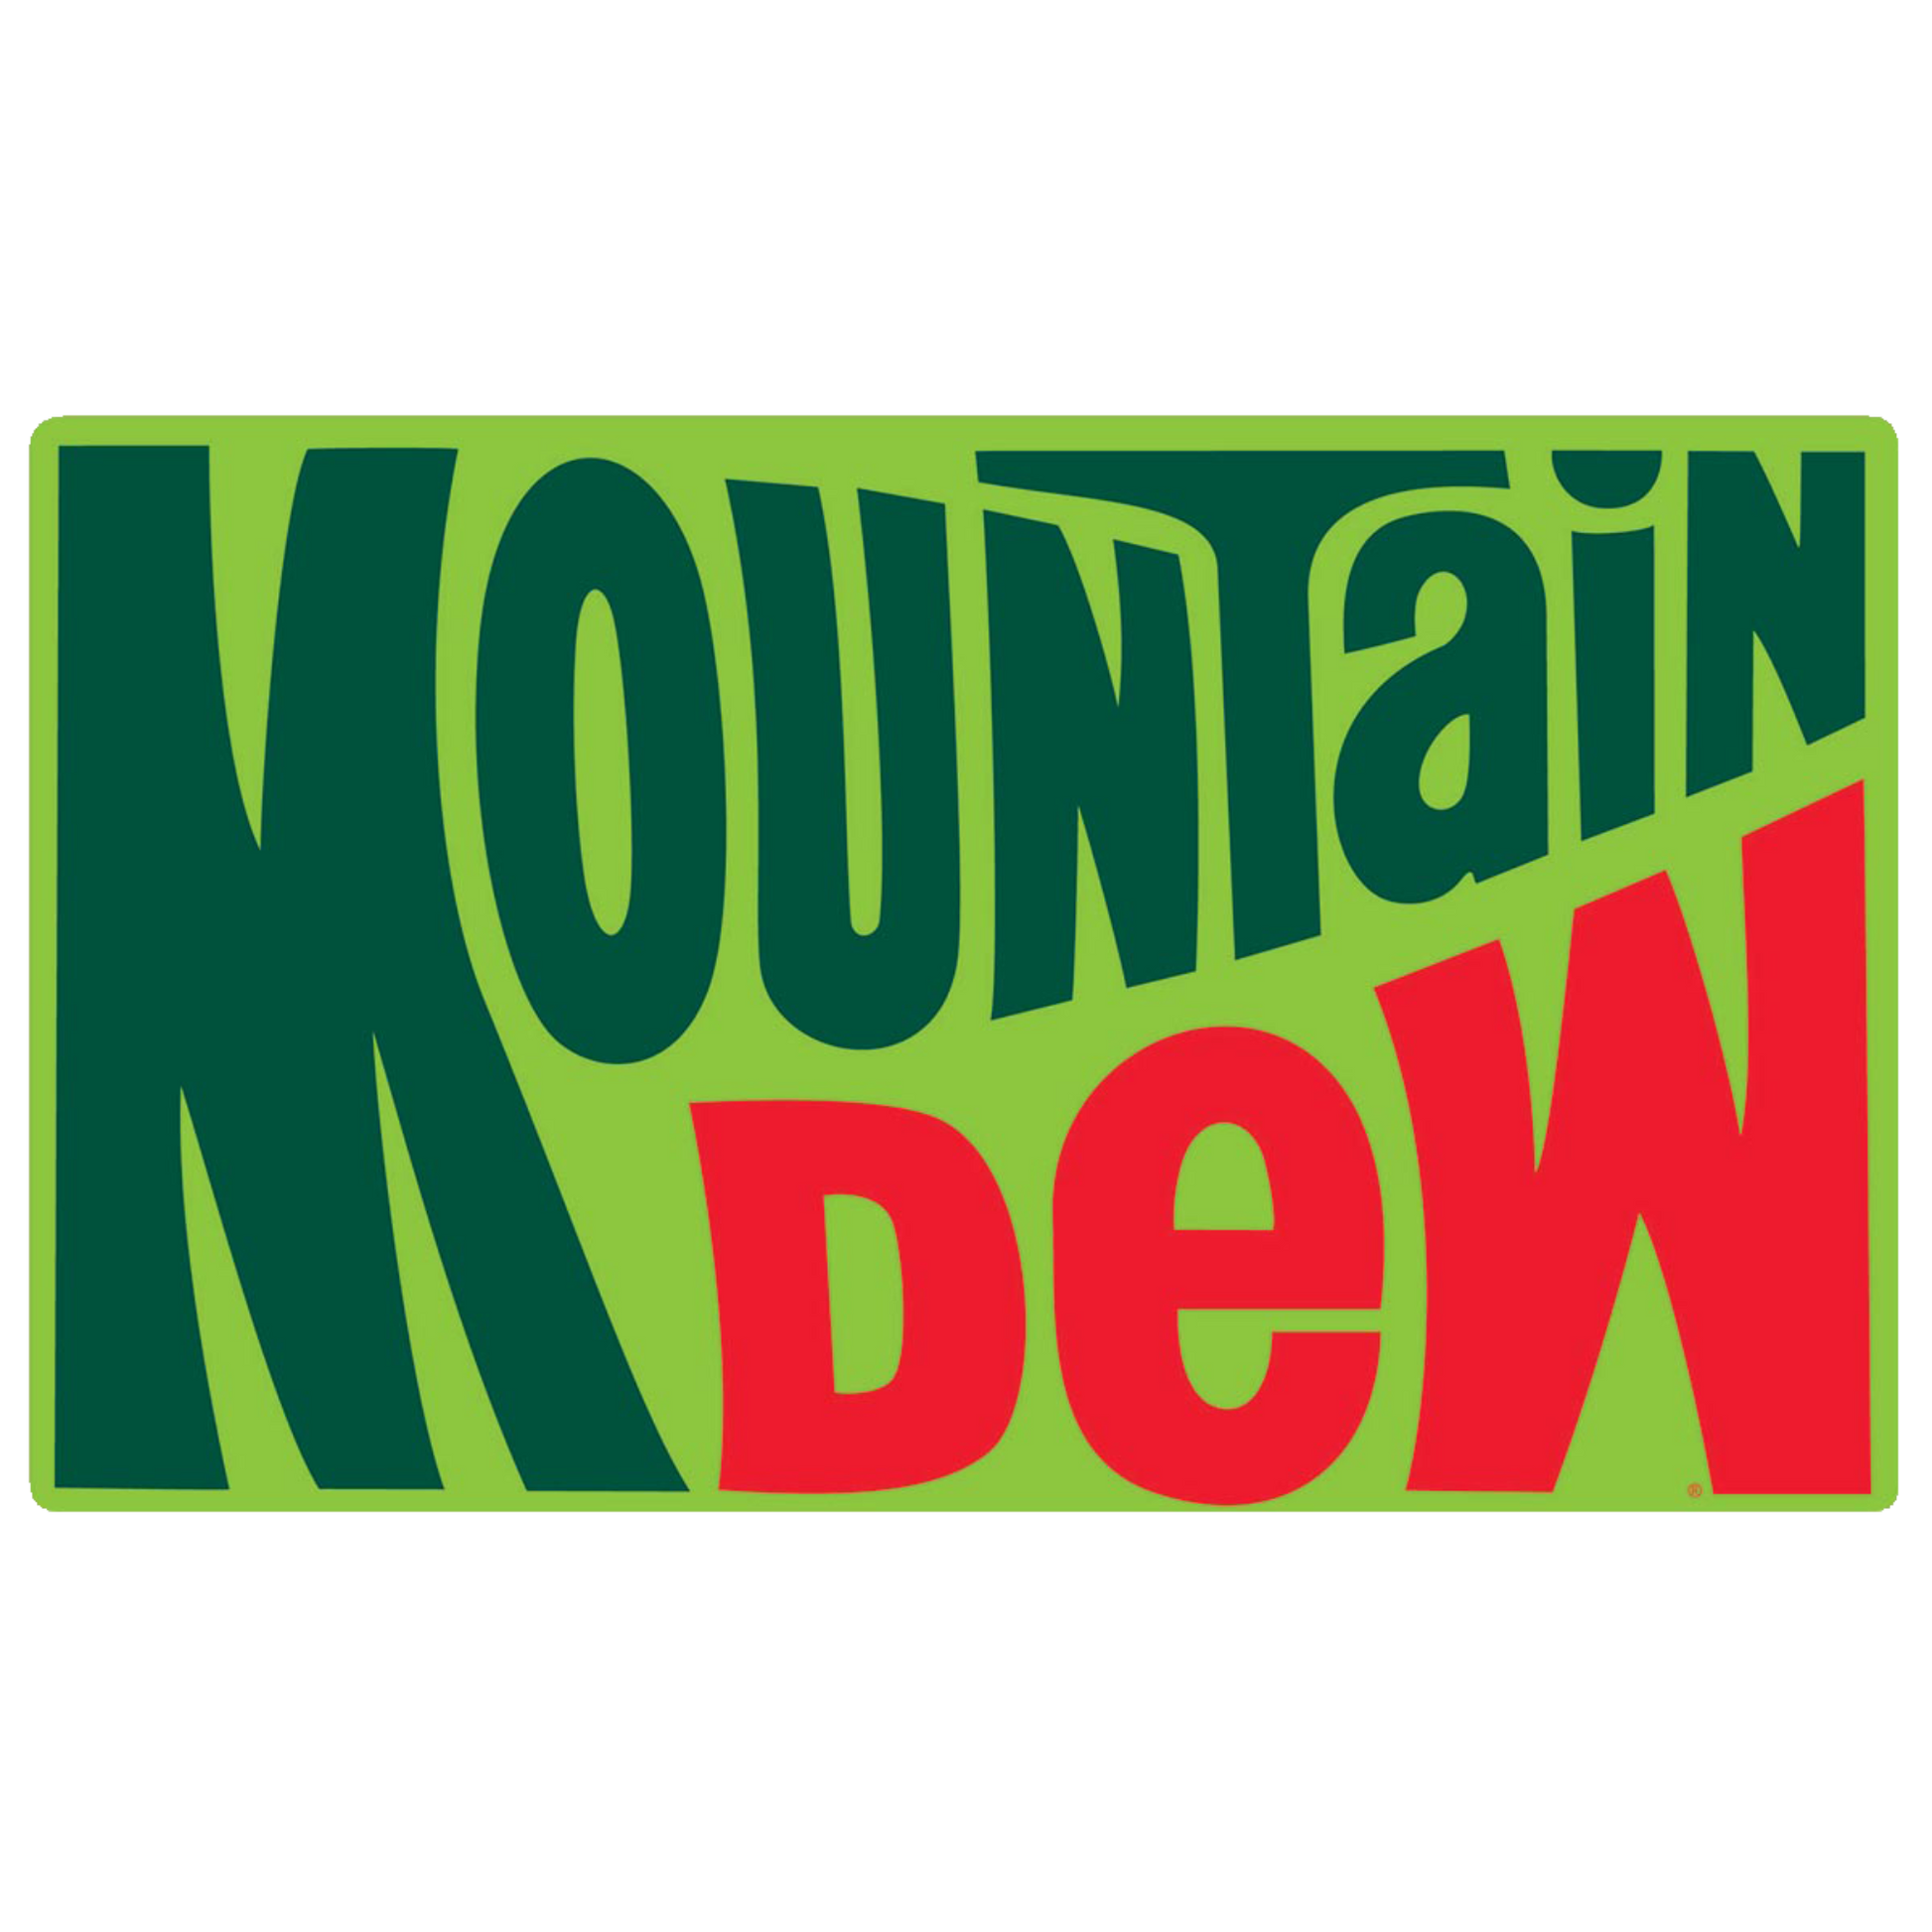 The classic 1970s Mountain Dew logo on a rectangular tin sign with bright green and red colors.